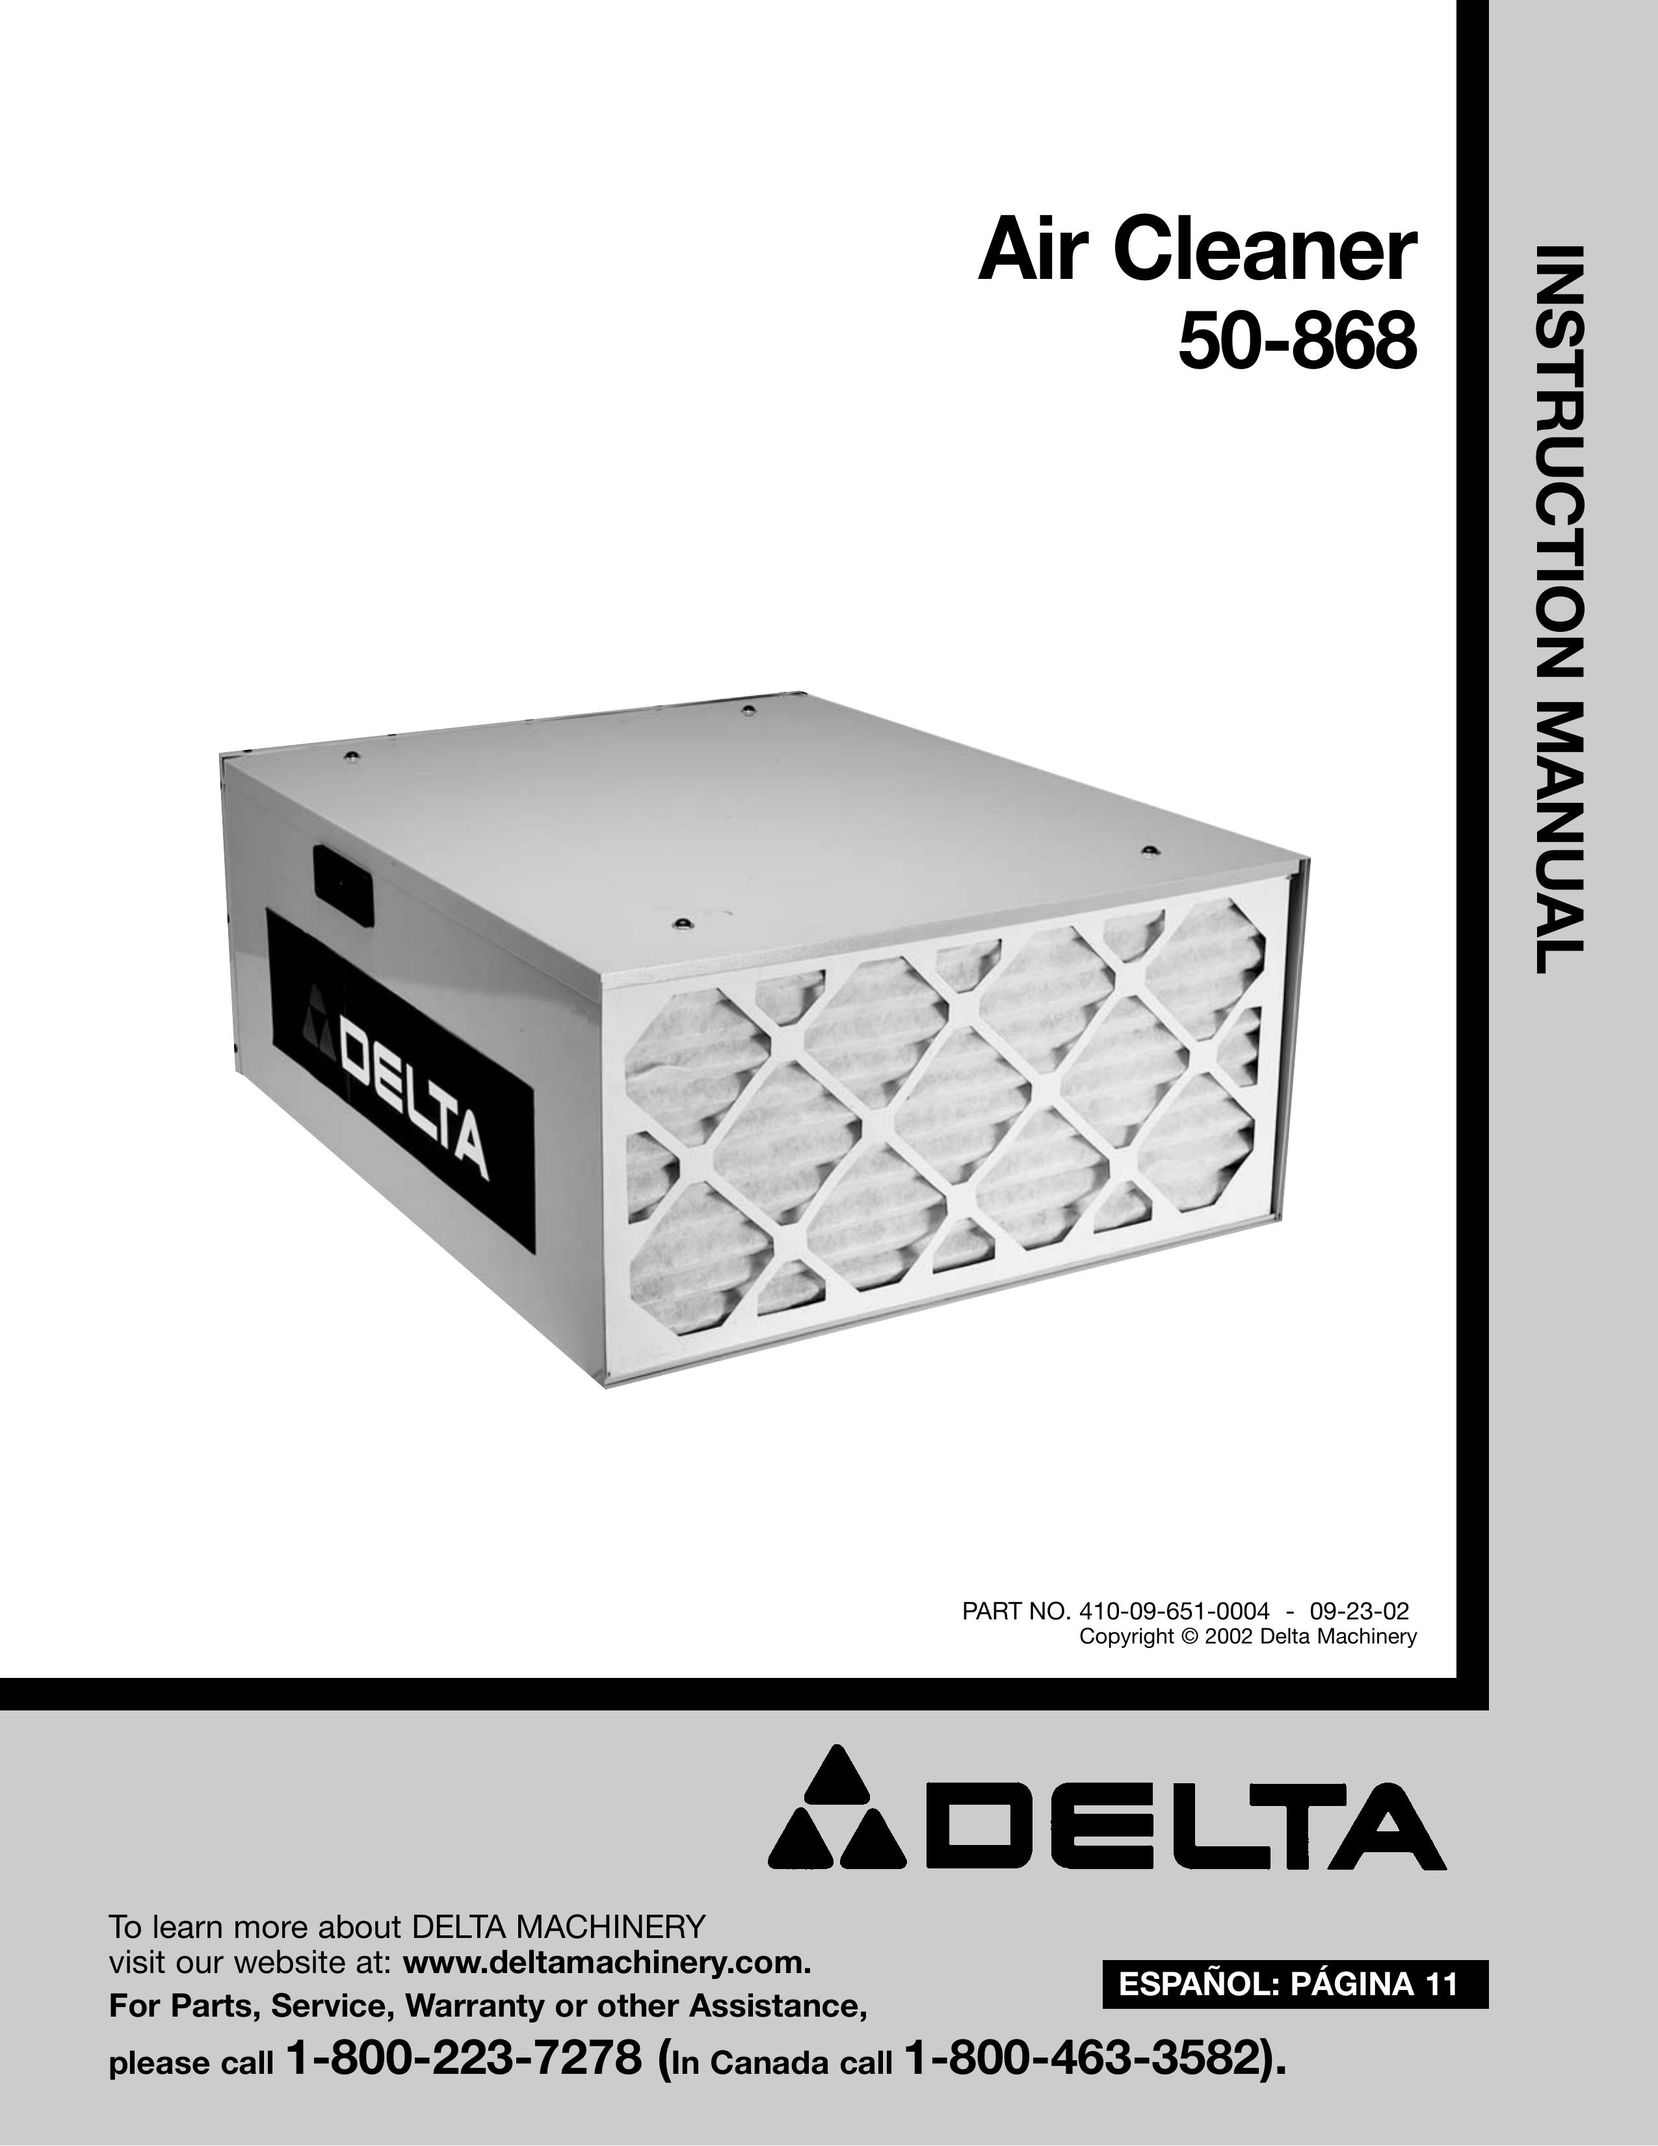 Deltaco 50-868 Air Cleaner User Manual